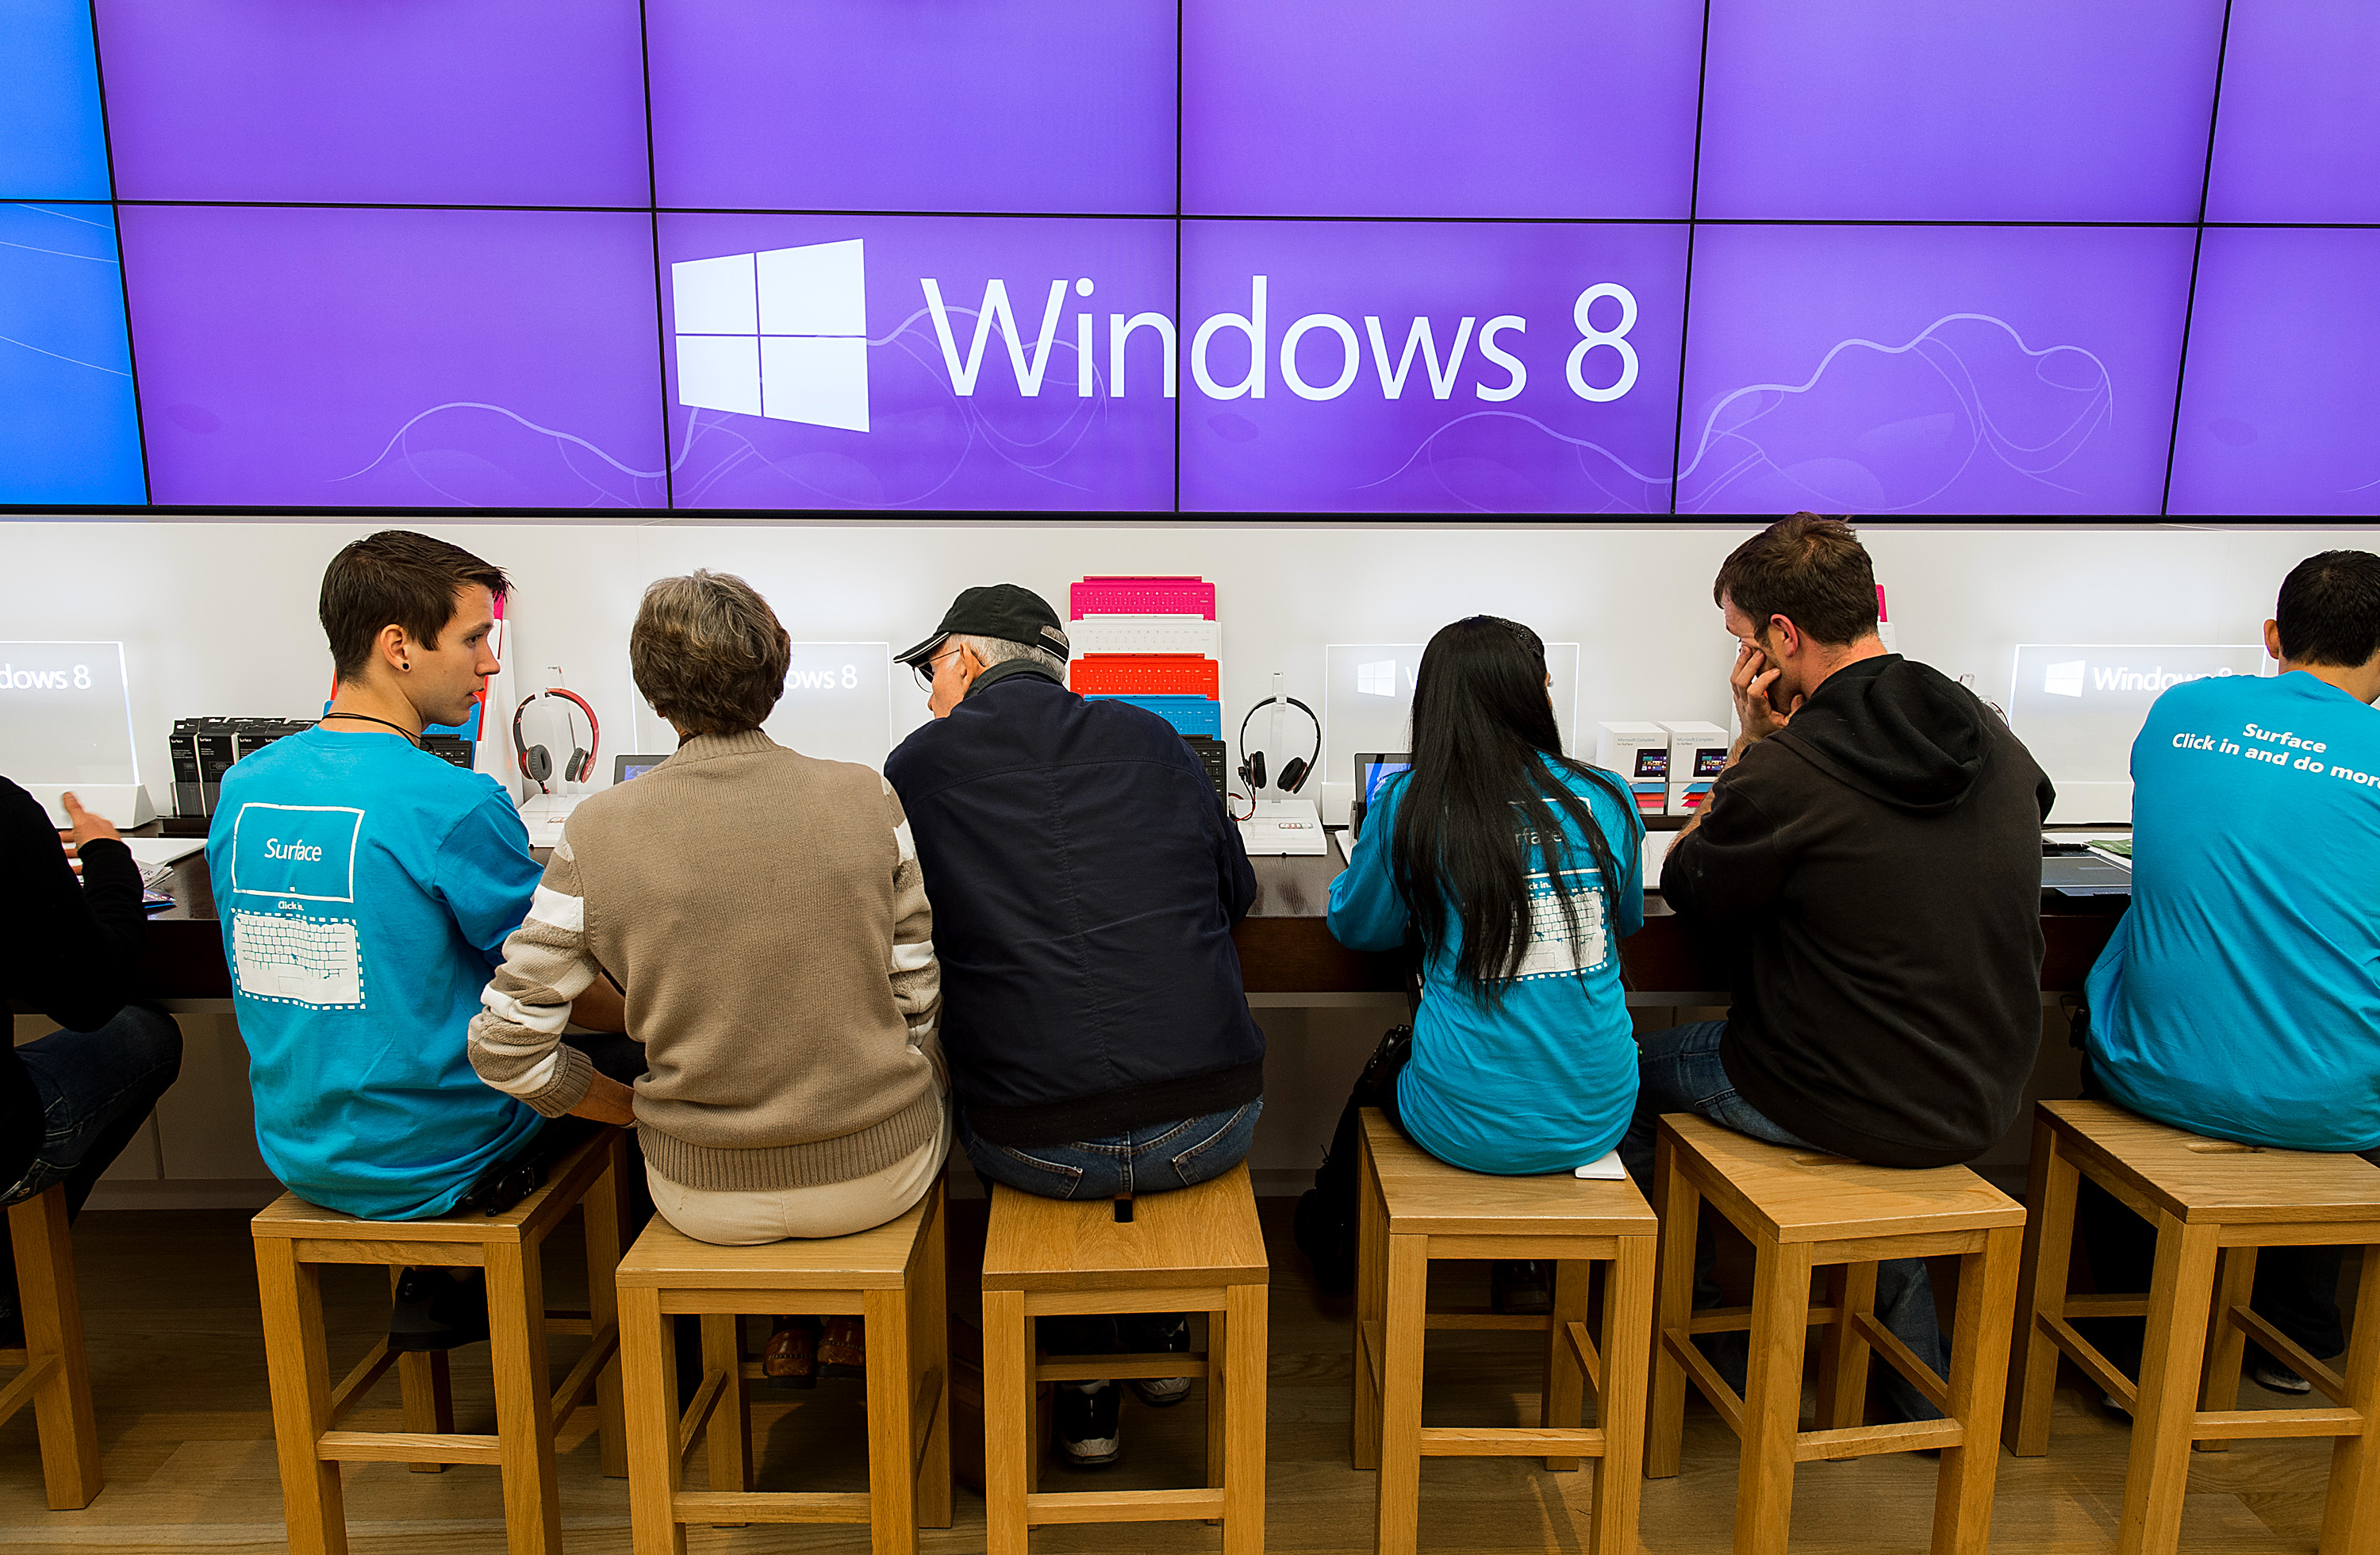 Employees assist customers at the opening of a Microsoft Corp. store in Bellevue, Washington, U.S., on Friday, Oct. 26, 2012. (Bloomberg&mdash;Bloomberg via Getty Images)